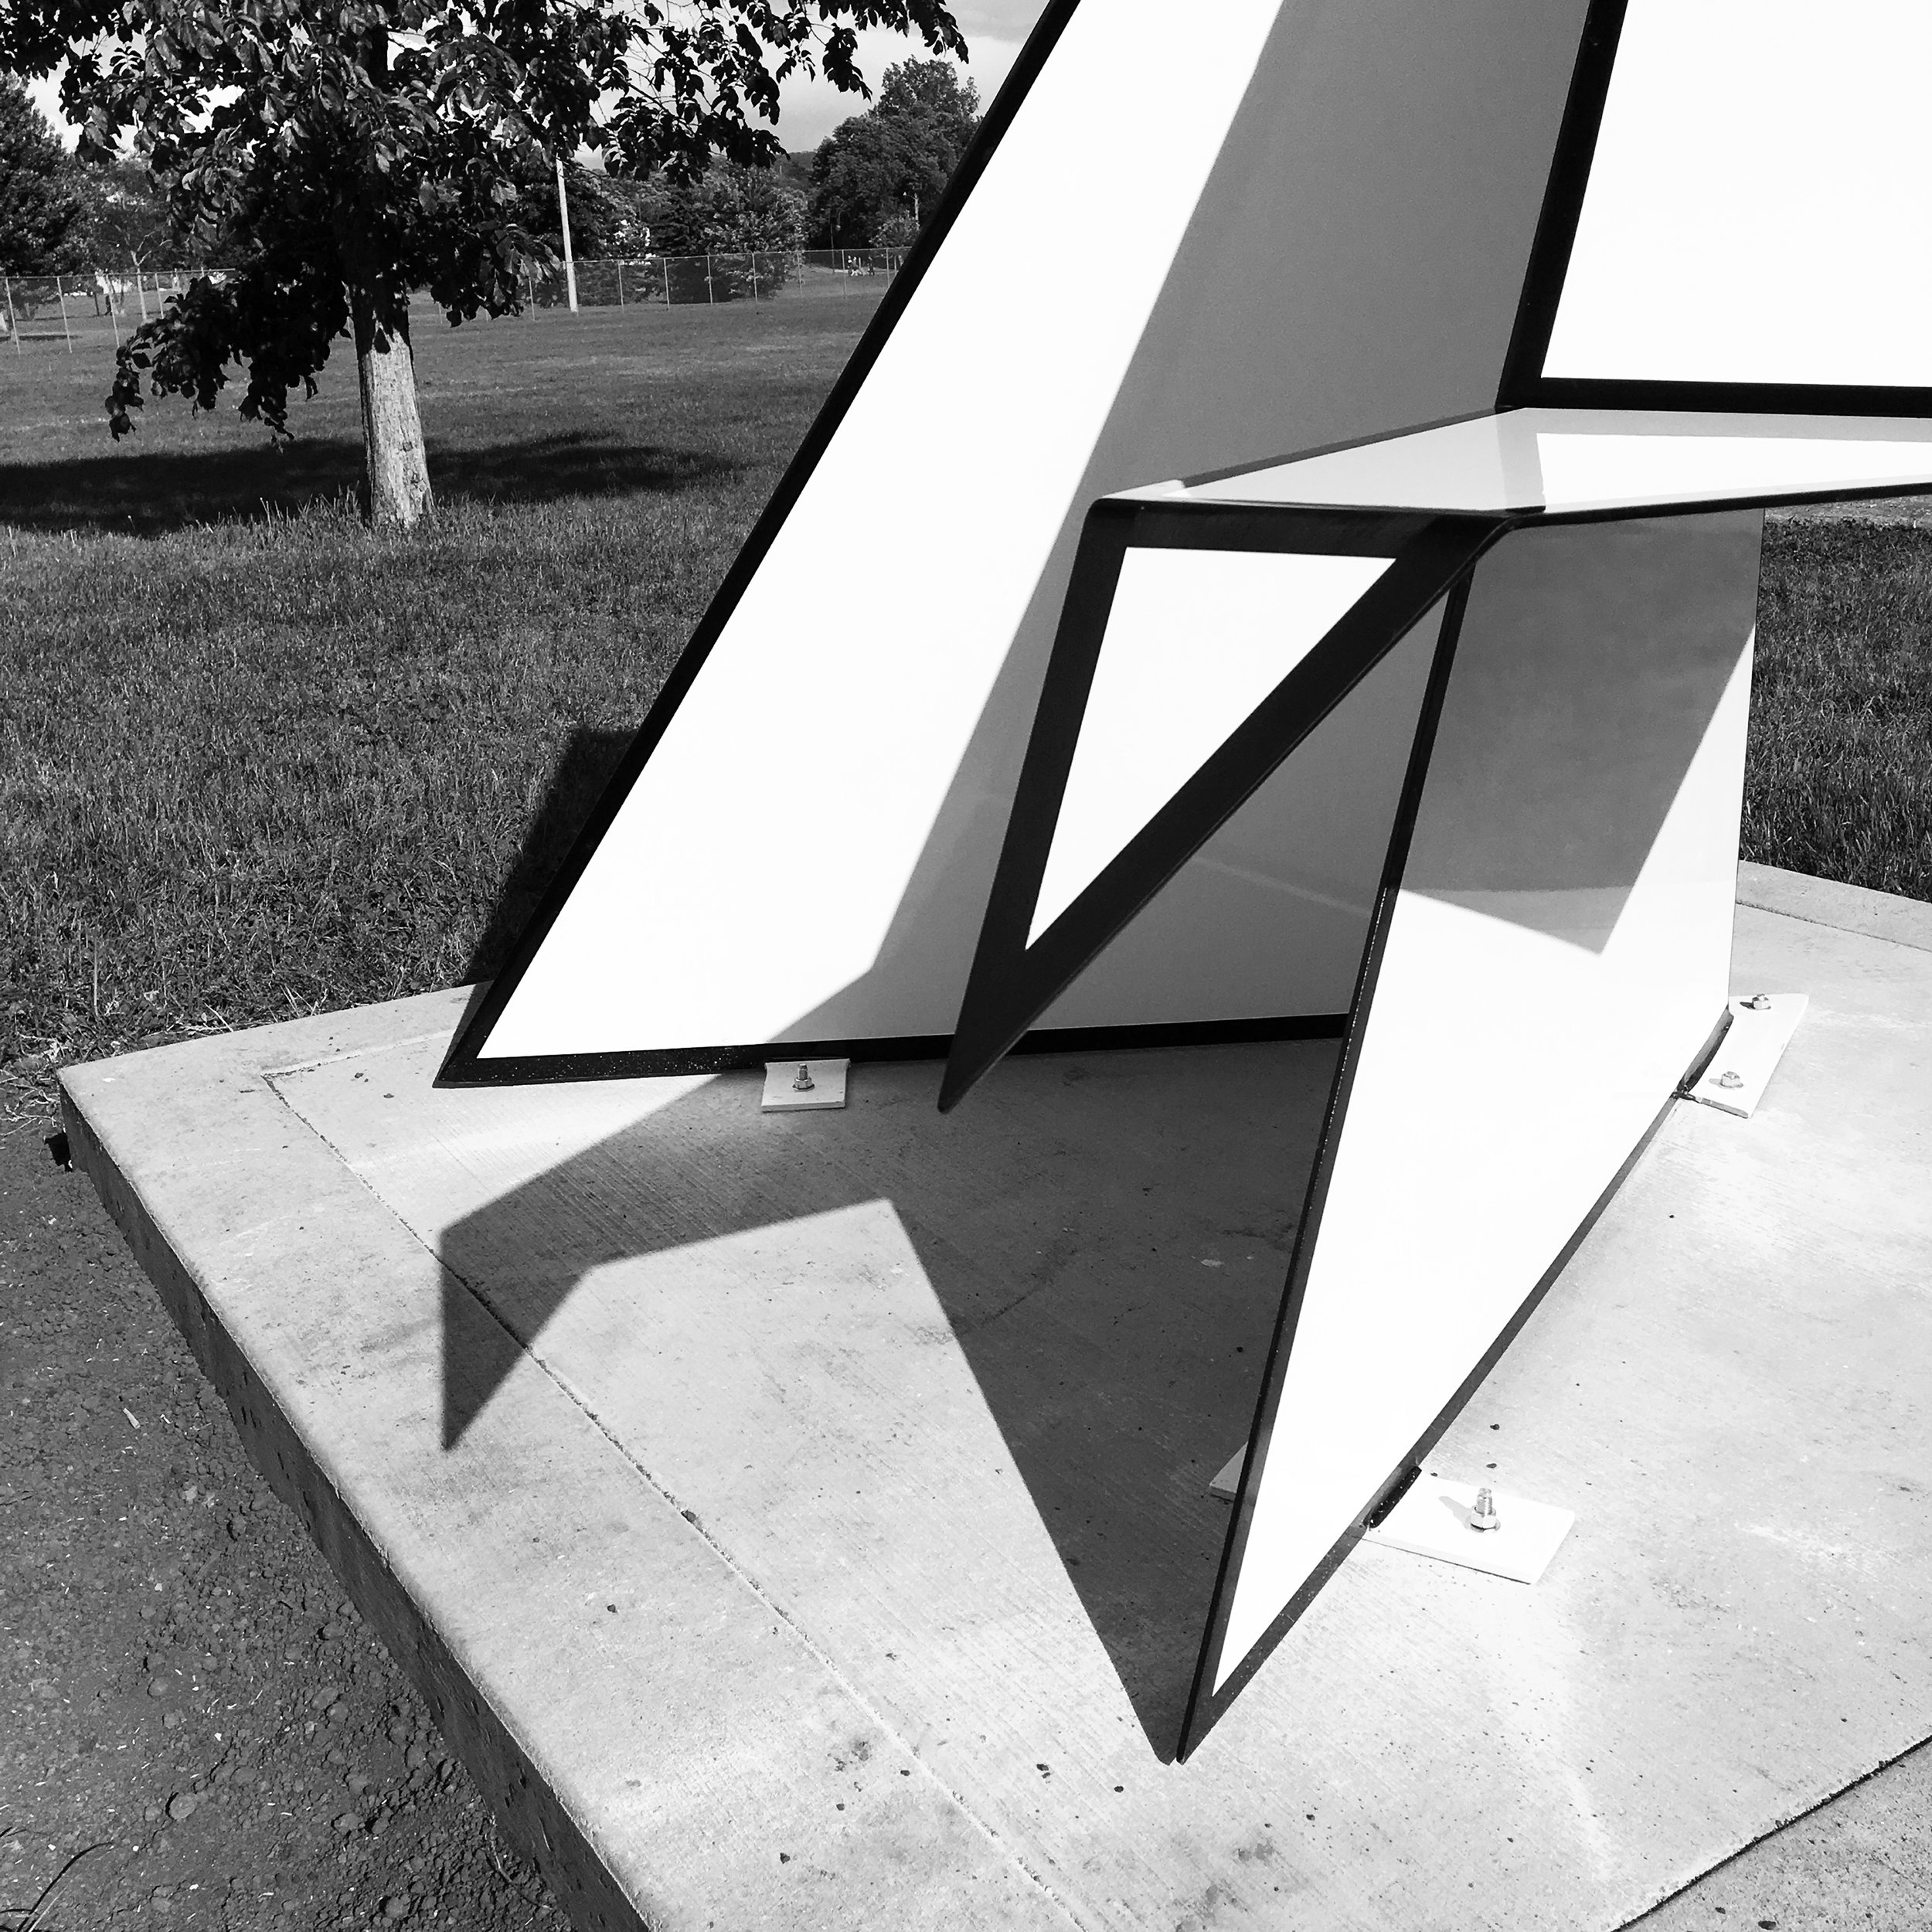 sculpture BW close up with shadow.jpg